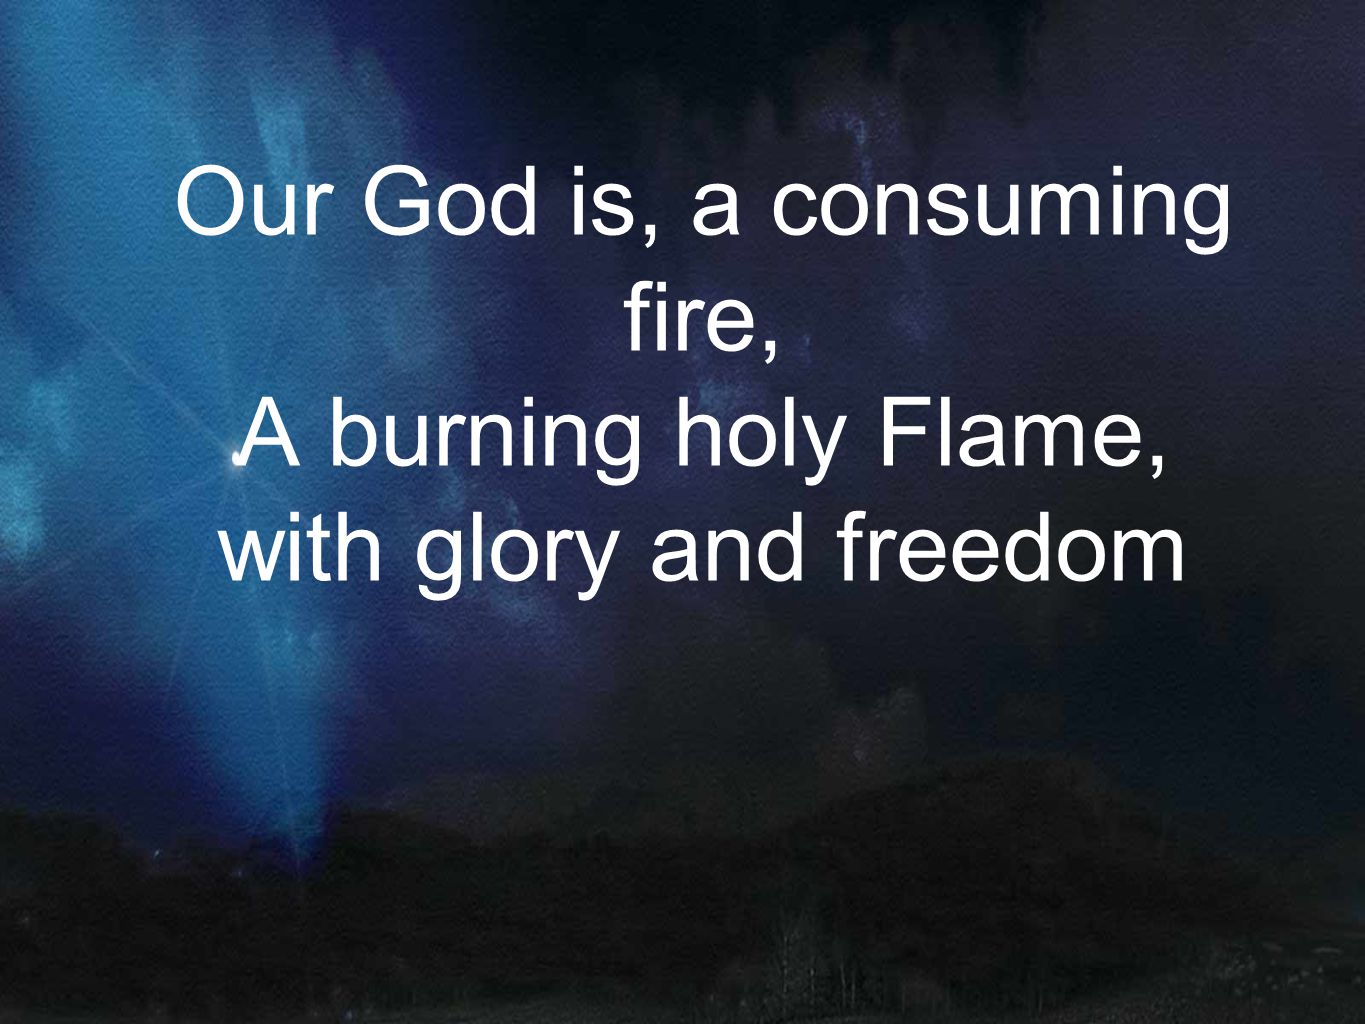 Our God is, a consuming fire, A burning holy Flame, with glory and freedom